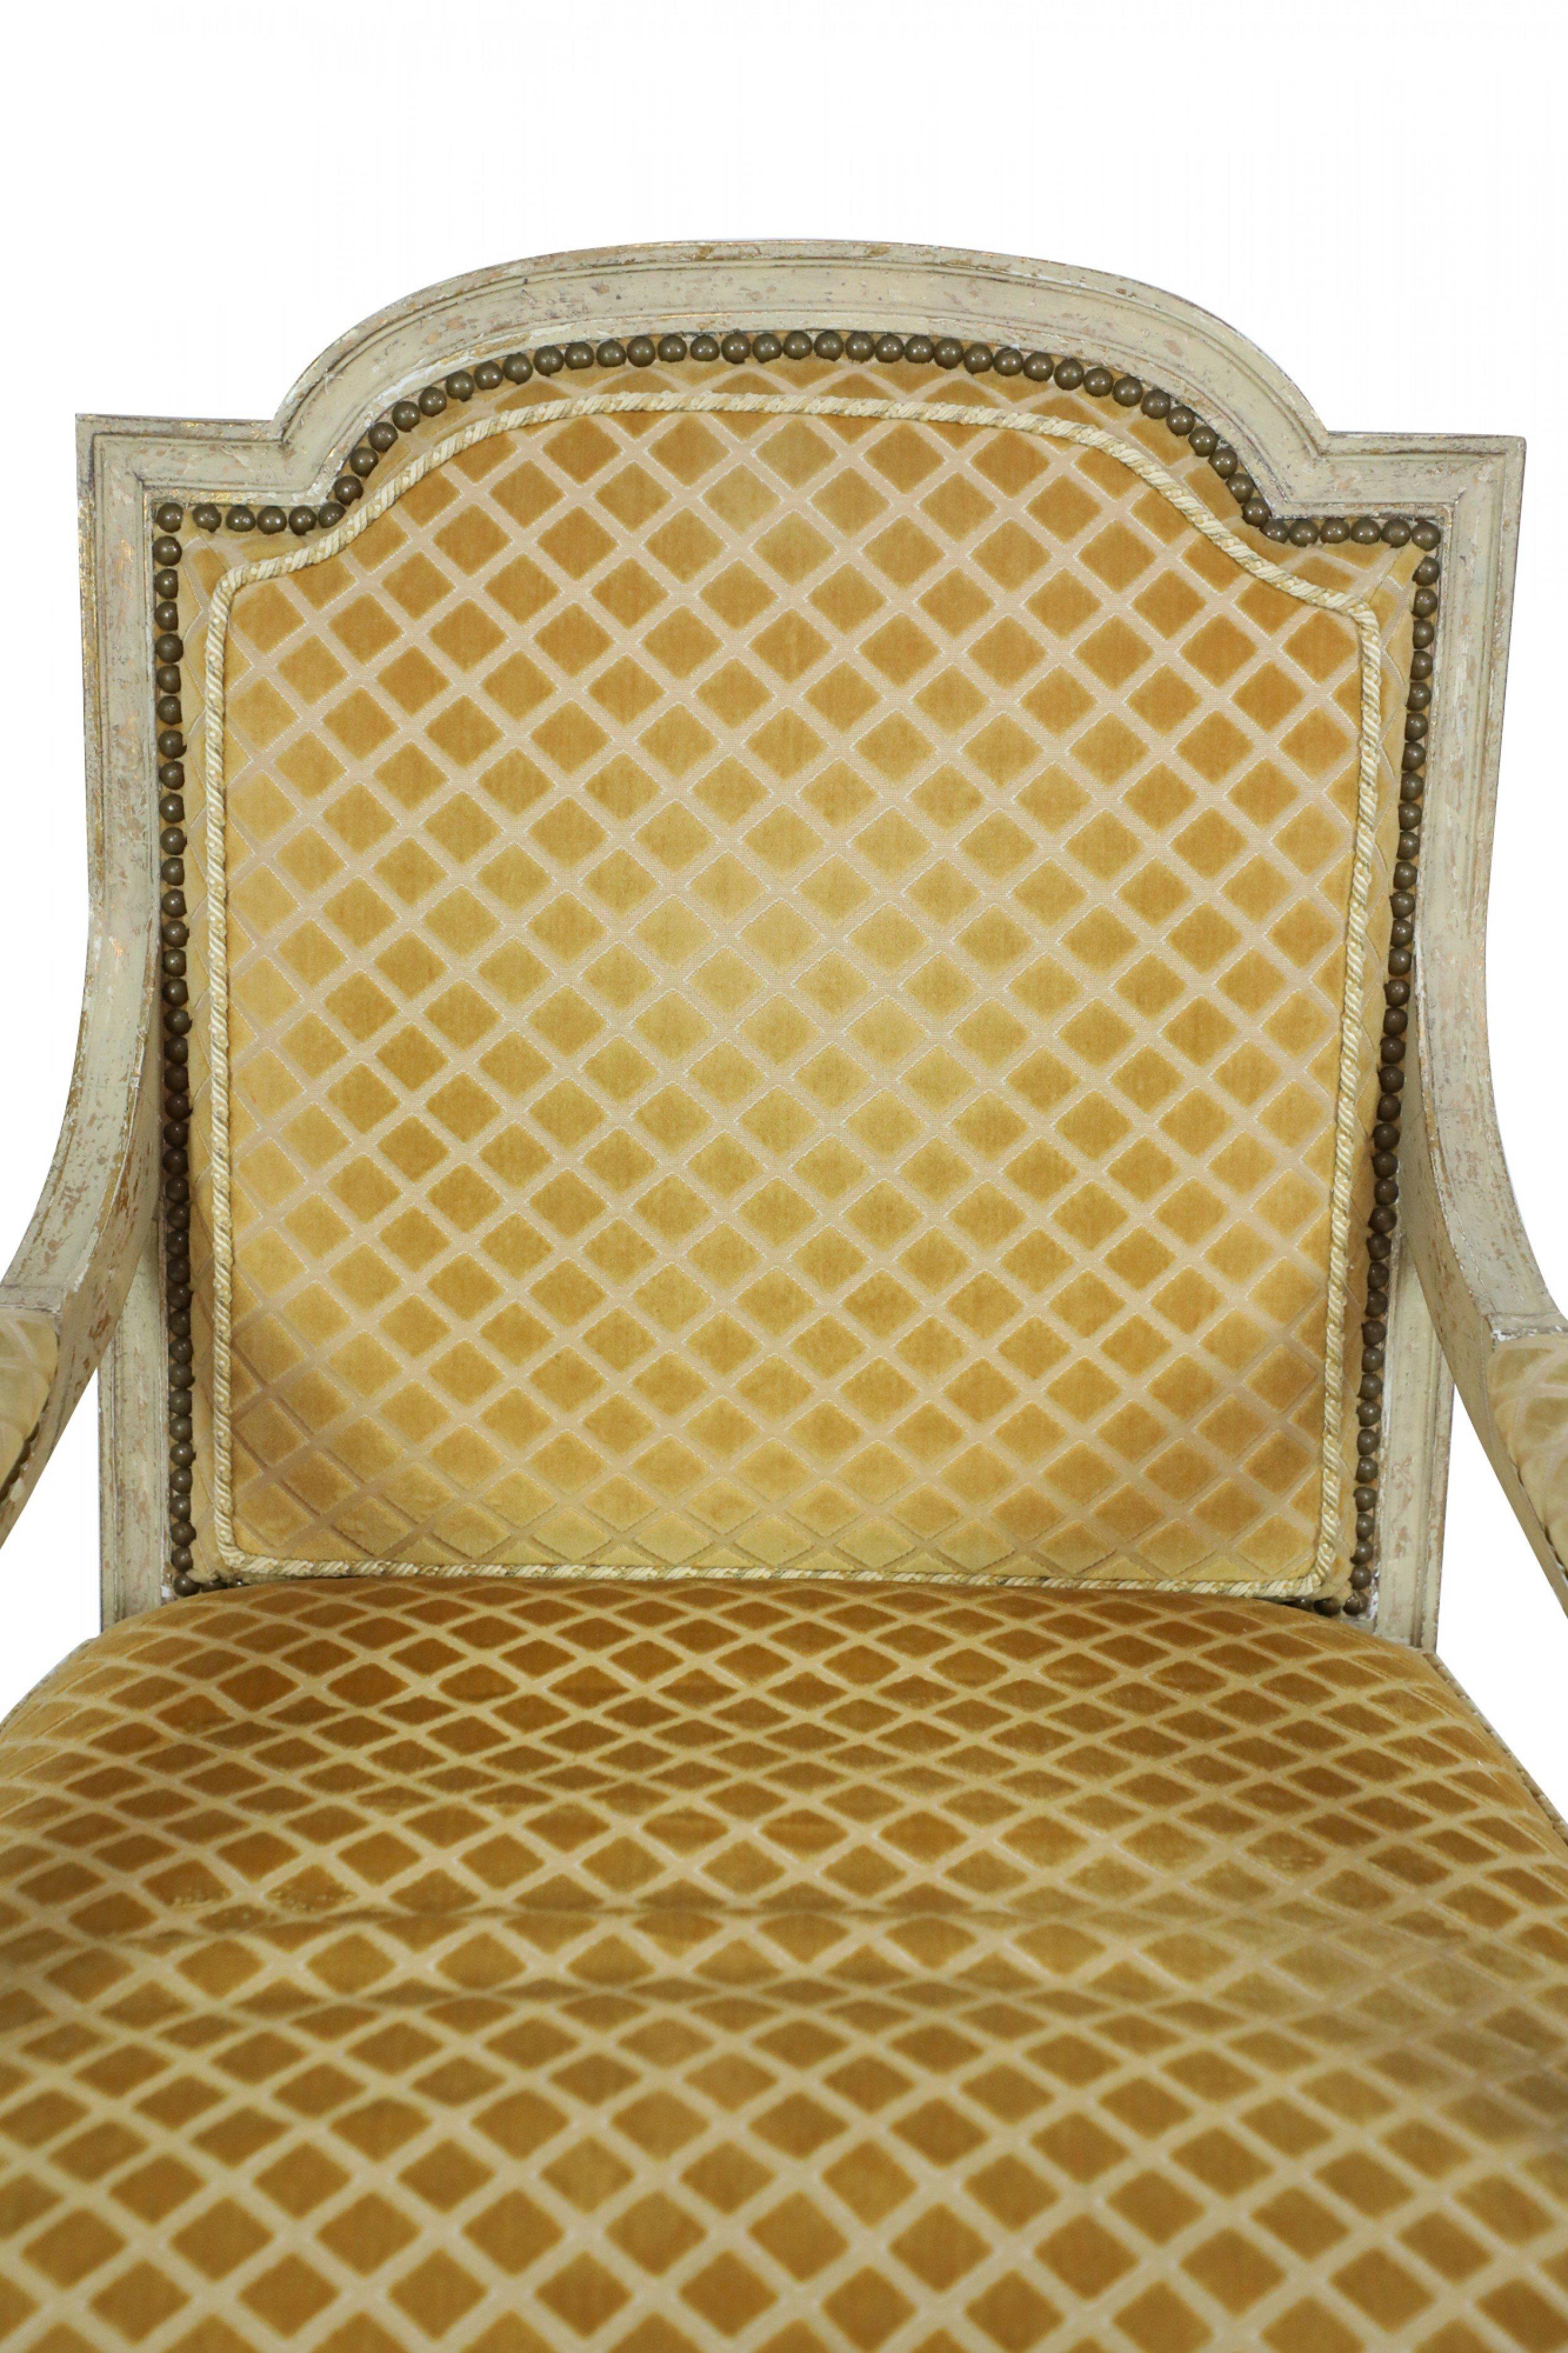 Pair of Louis XVI-Style Gold Upholstered Fauteuils / Armchairs For Sale 4